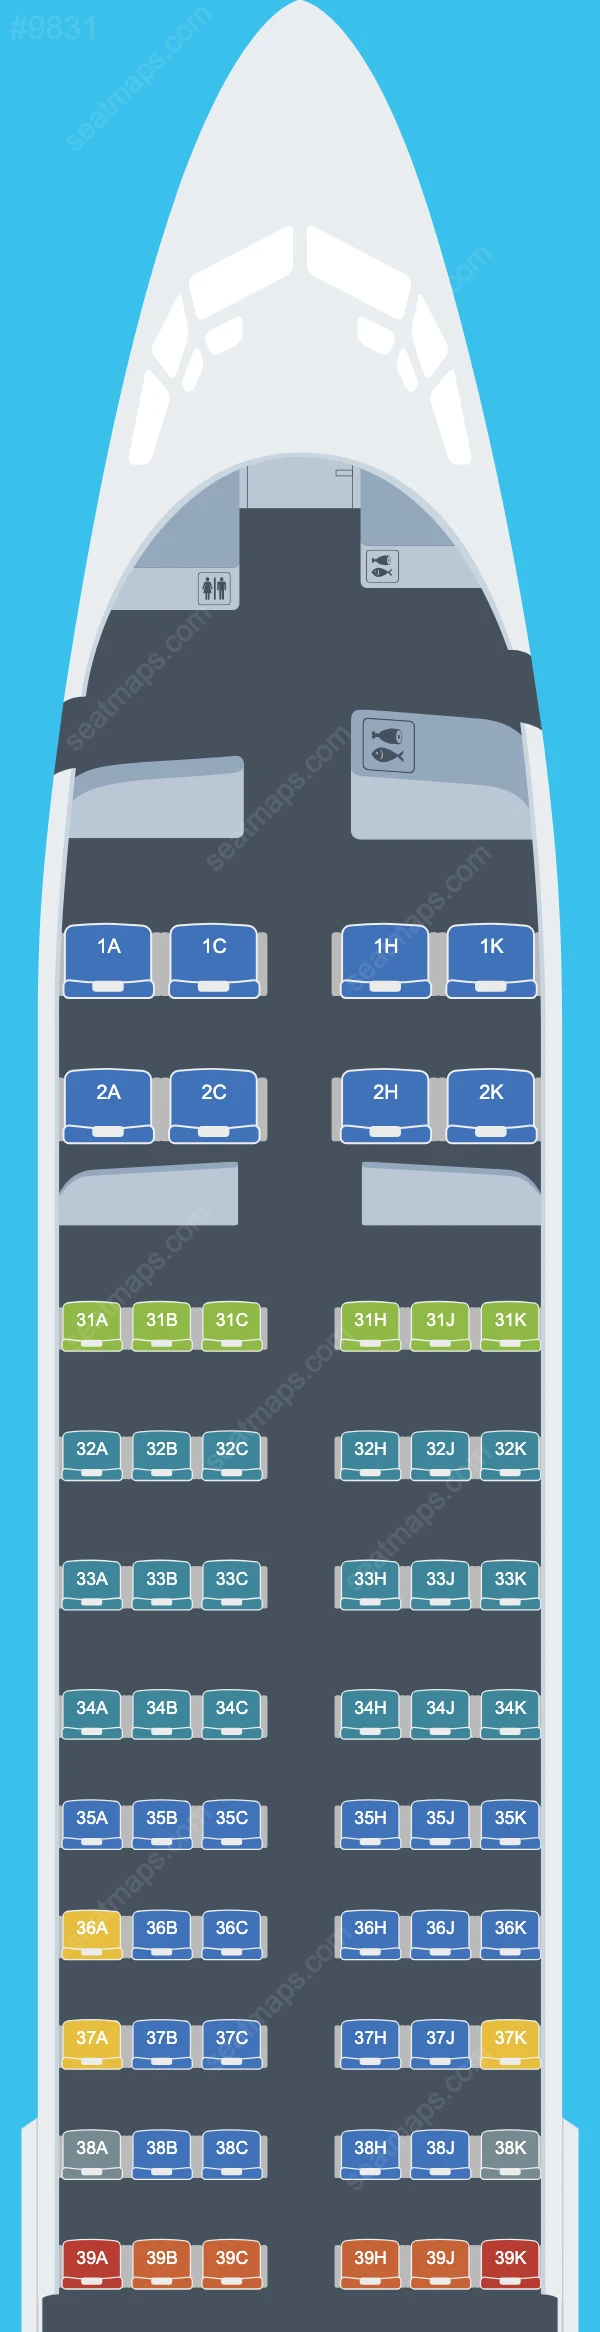 China Southern Boeing 737 Seat Maps 737-800 V.1